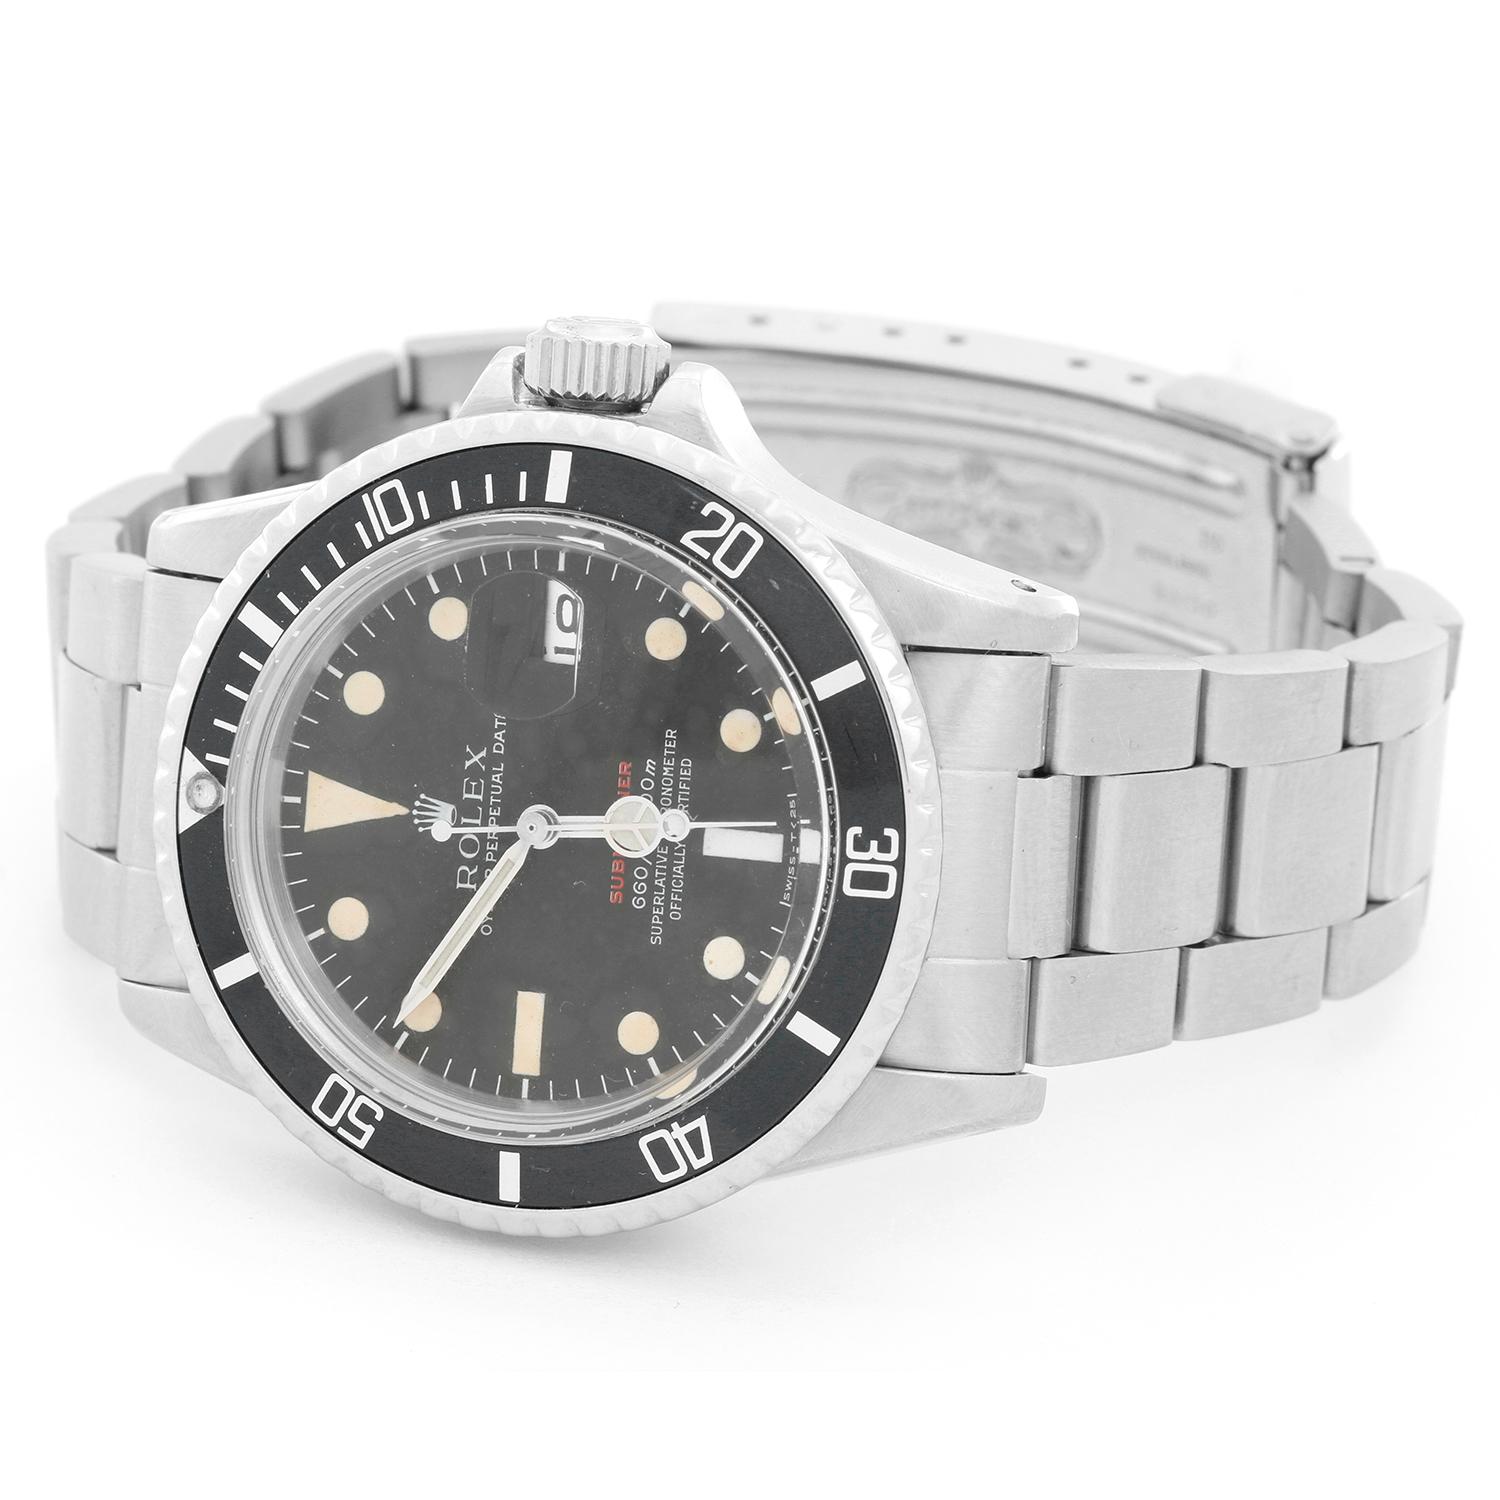 Very Collectible Vintage Rolex Red Submariner 1680 - Automatic winding, acrylic crystal. Stainless steel case with black bezel insert  ( 41 mm ). Original black matte dial with Submariner print in red. Stainless steel Oyster bracelet with flip-lock